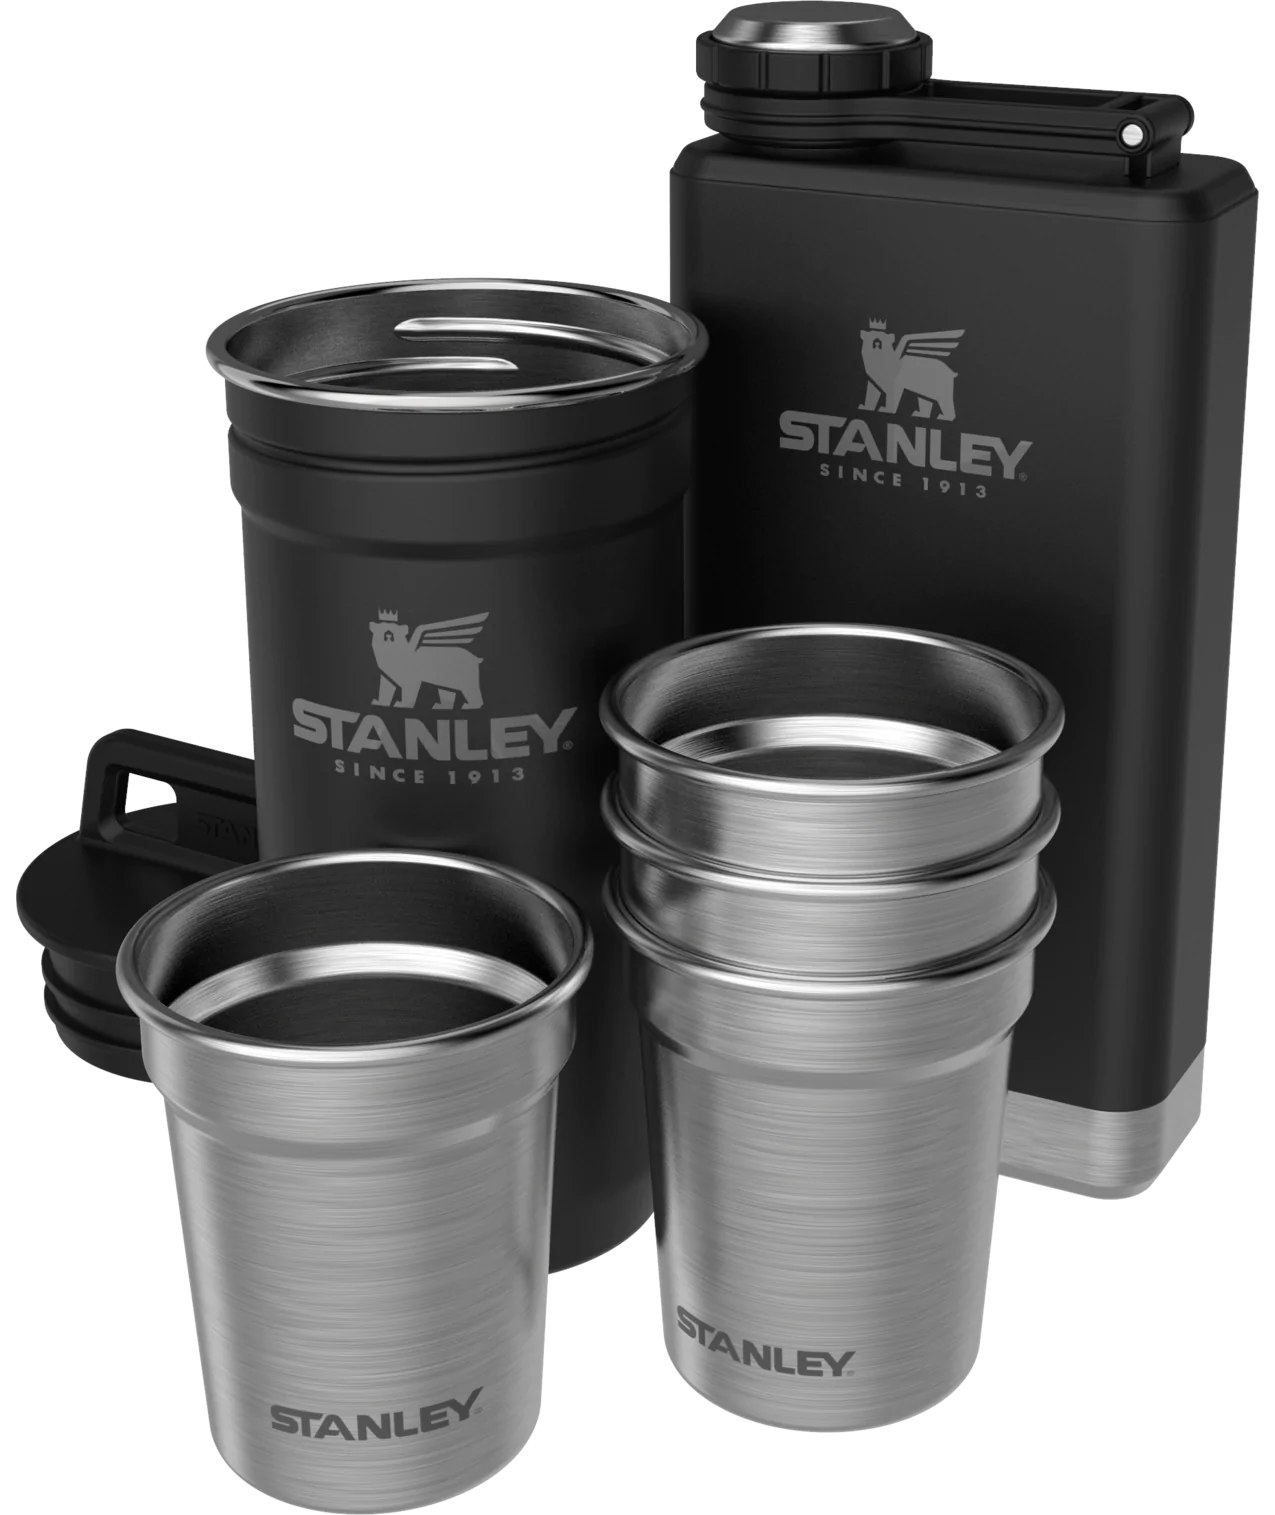 Promotional Stainless Steel Shot Glass Set - 1 oz.